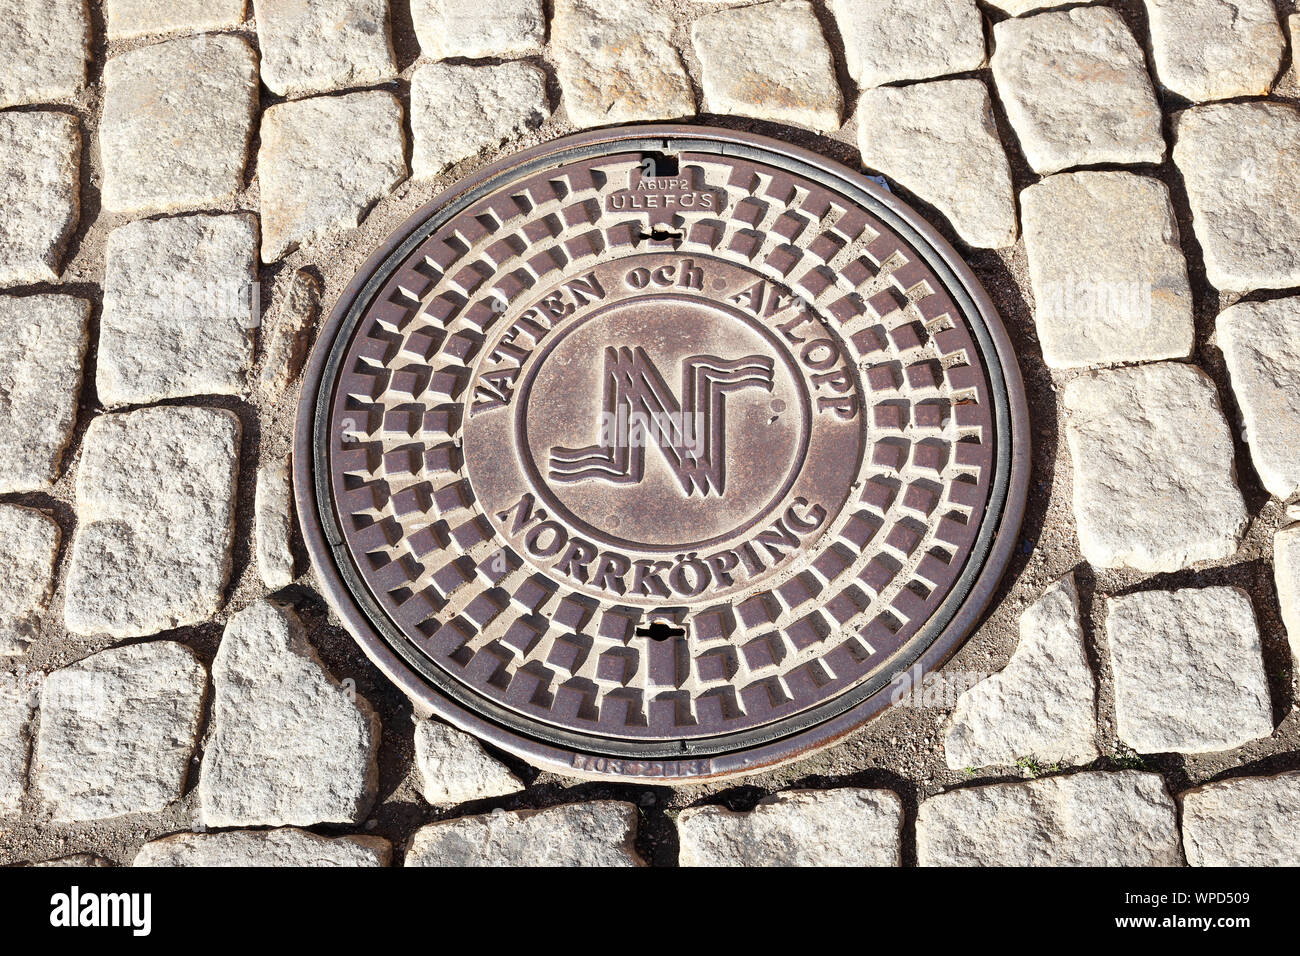 Norrkoping, Sweden - September 2, 2019: A manhole lid at the Drottninggatan strett with city of Norrkoping emblem. Stock Photo